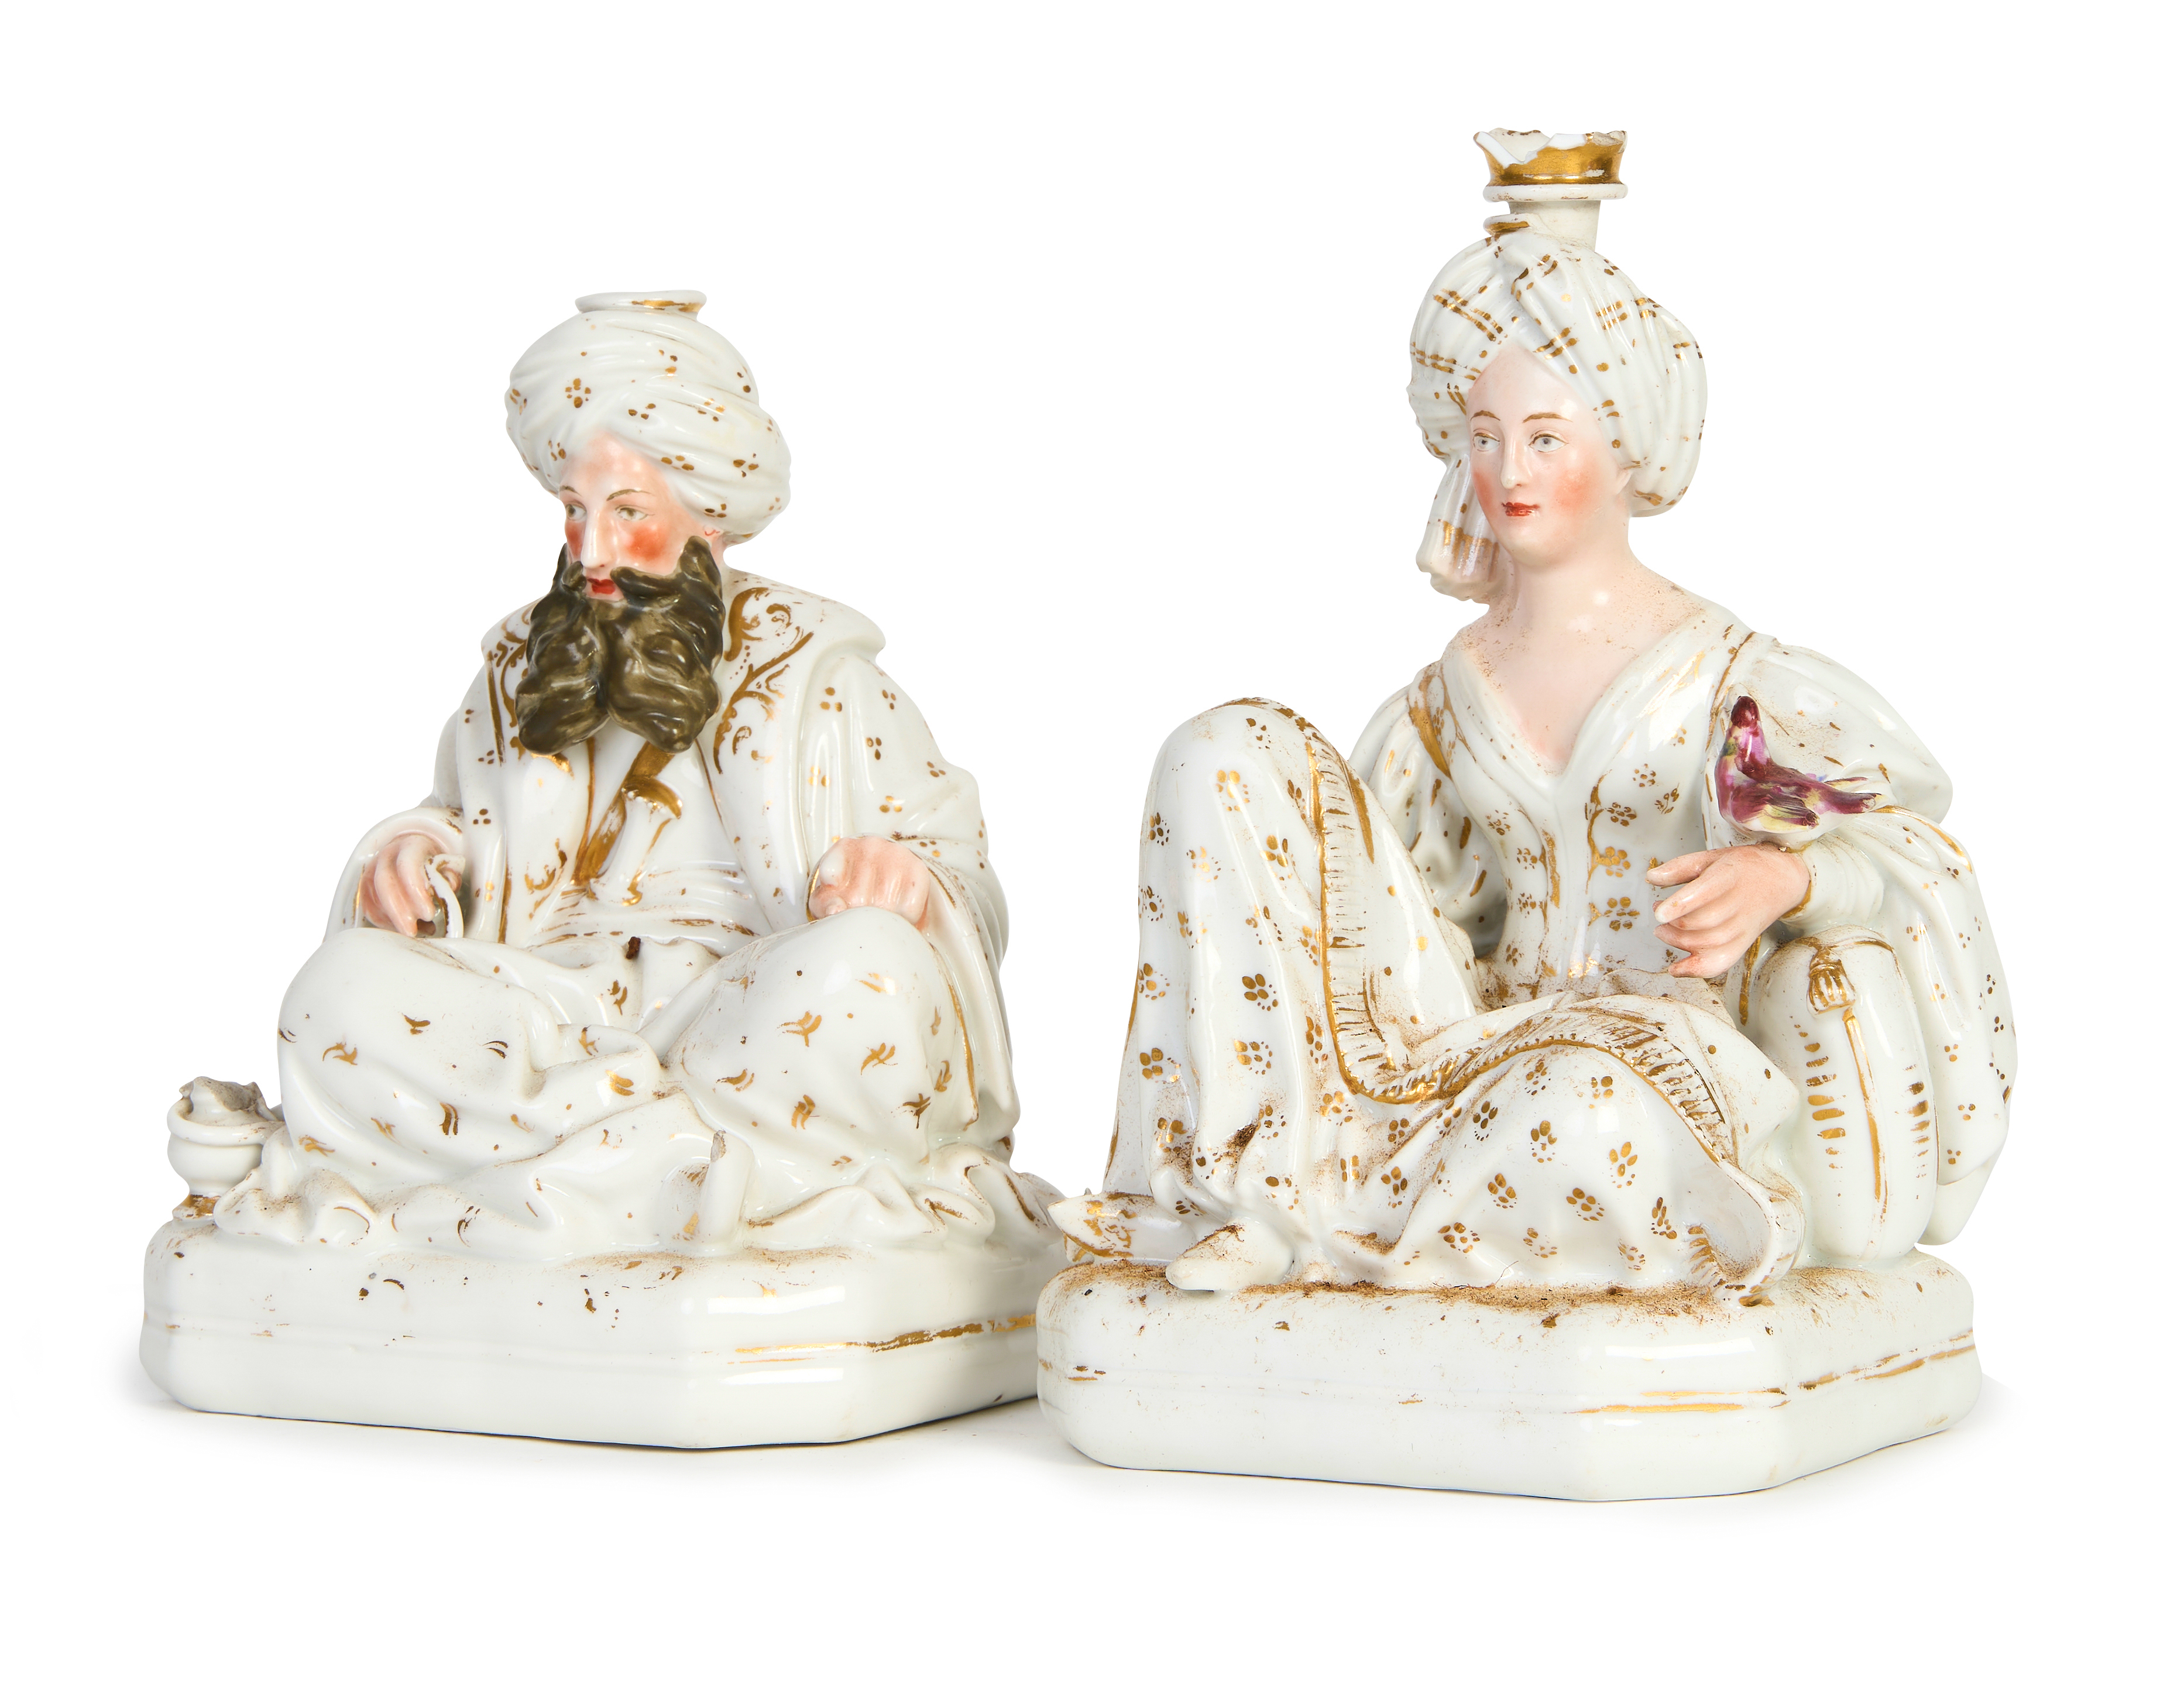 A PAIR OF SEATED SULTAN & SULTANA FIGURINES, JACOB PETIT, 19TH CENTURY FRANCE - Image 2 of 4